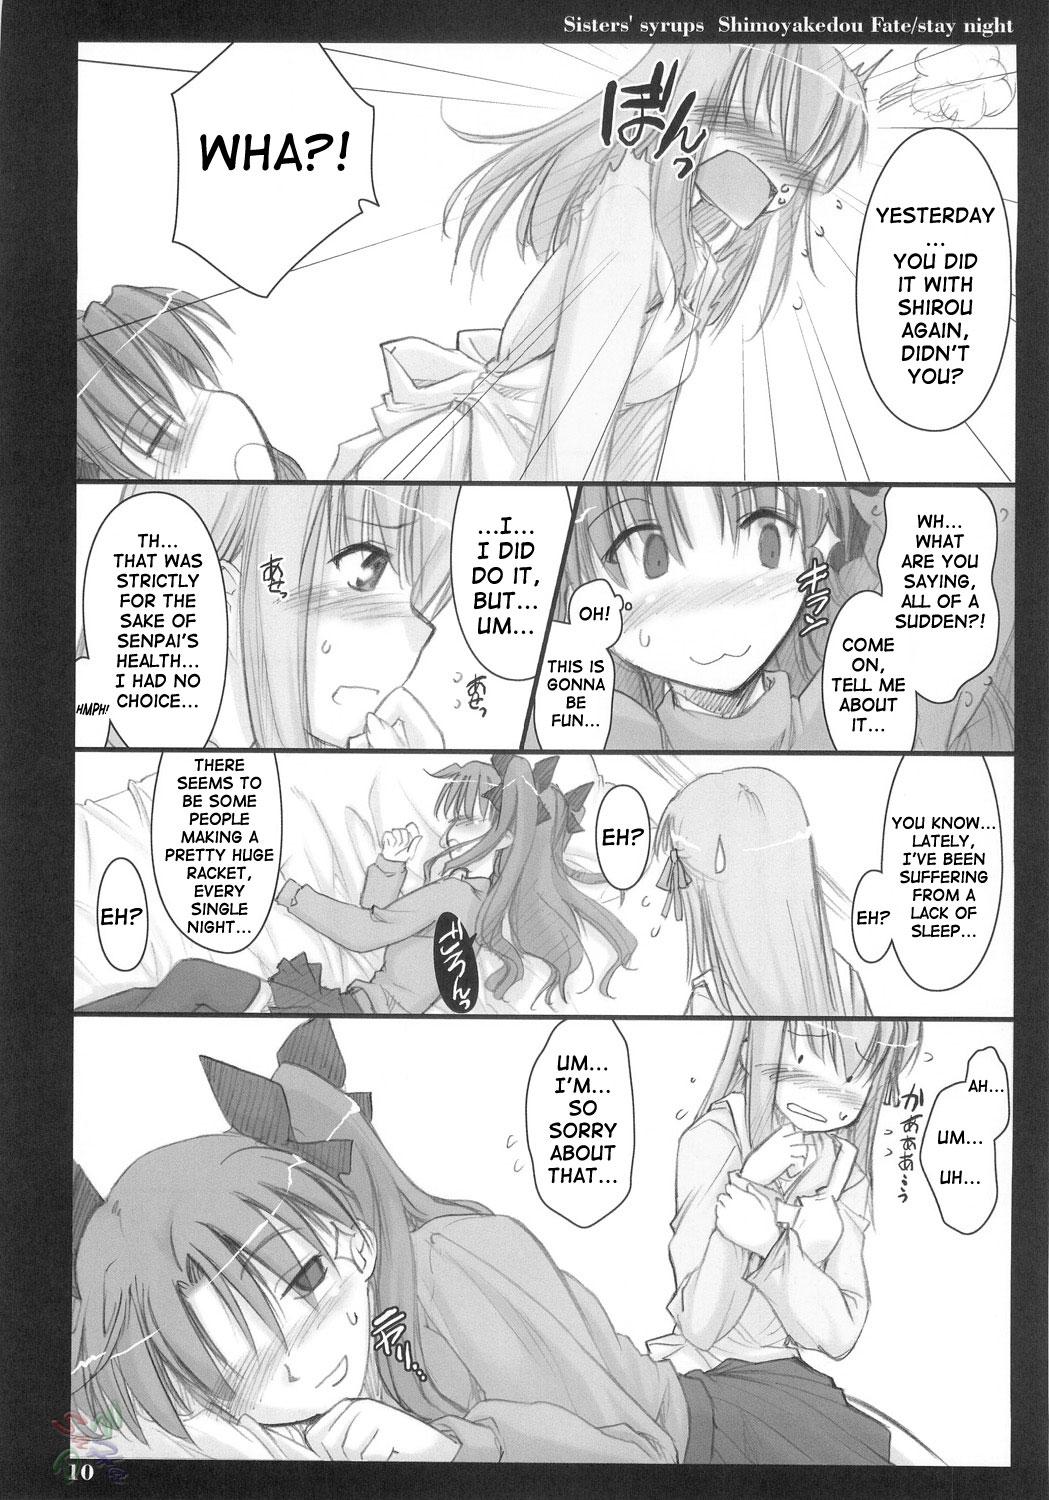 Oil Sisters' Syrups - Fate stay night Family - Page 9